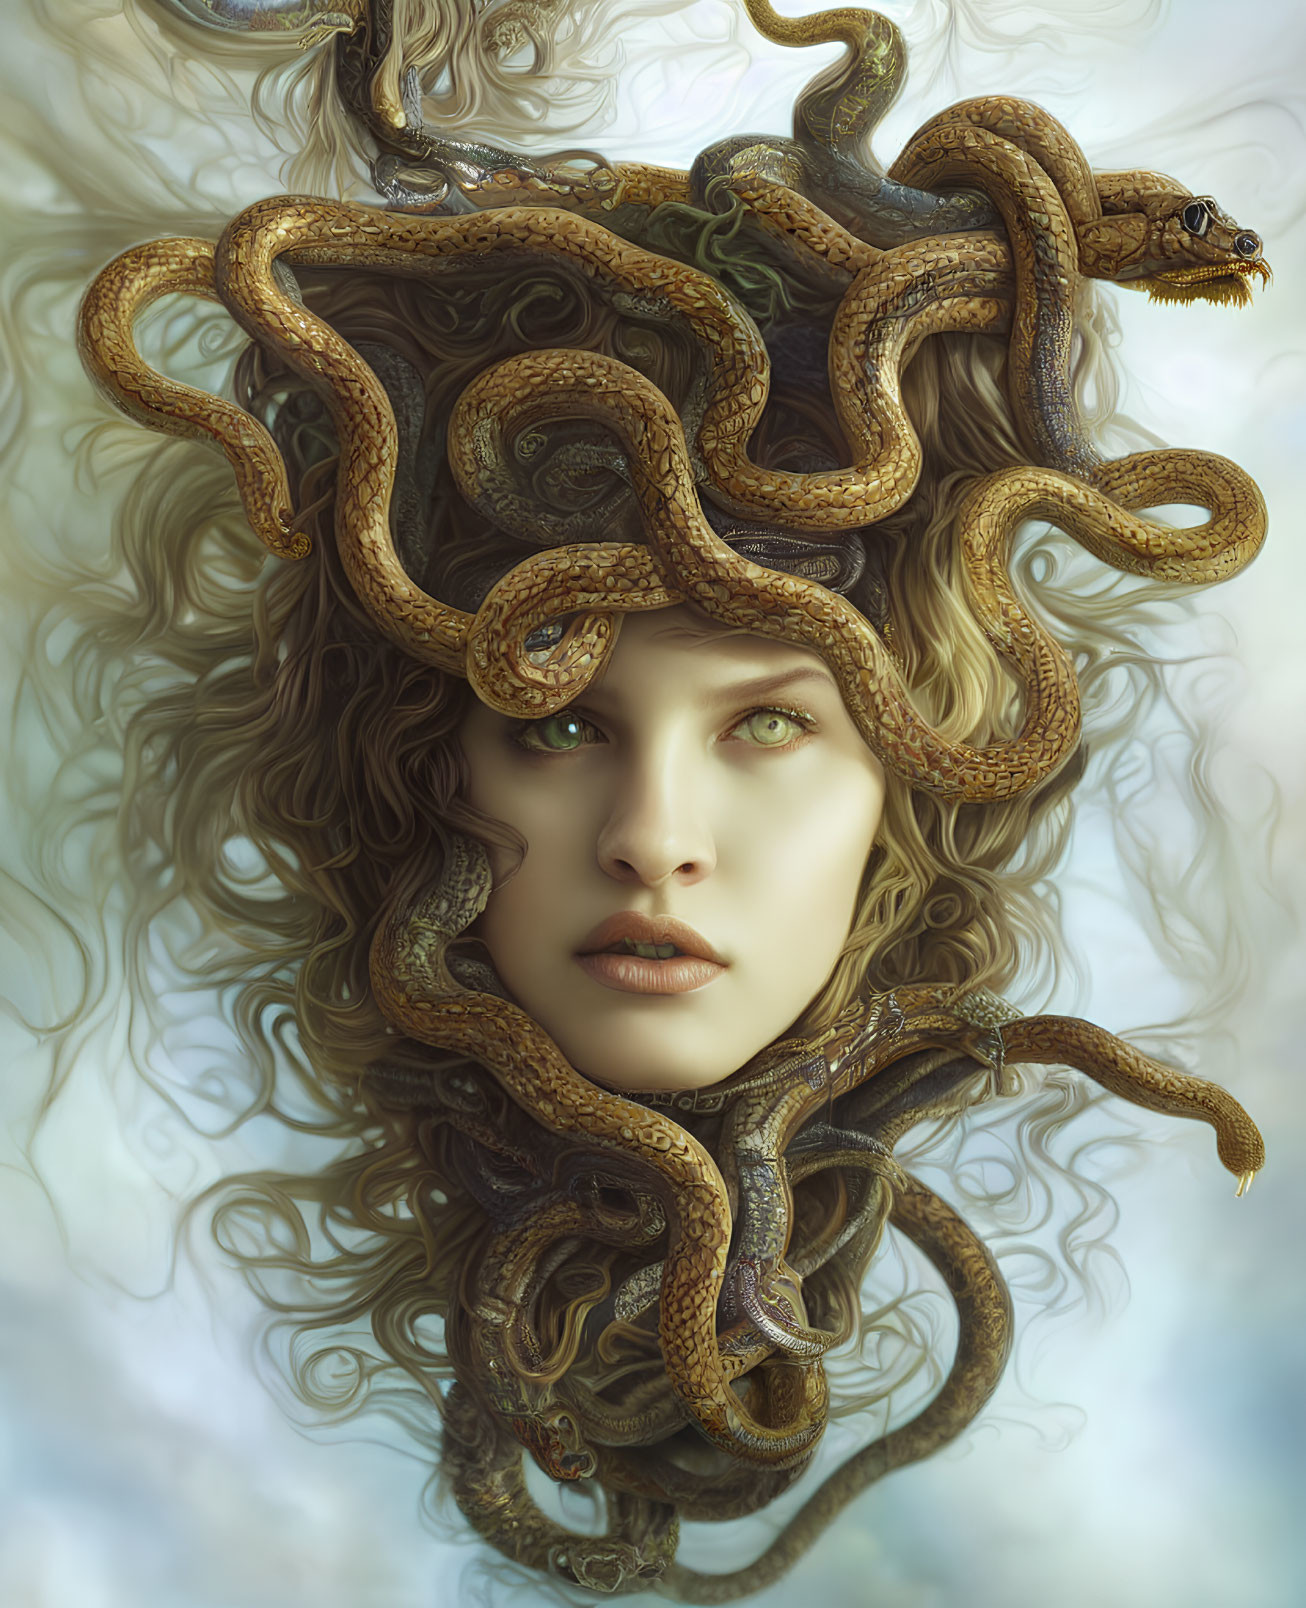 Digital artwork: Pale person with green eyes, hair of lifelike snakes in brown shades